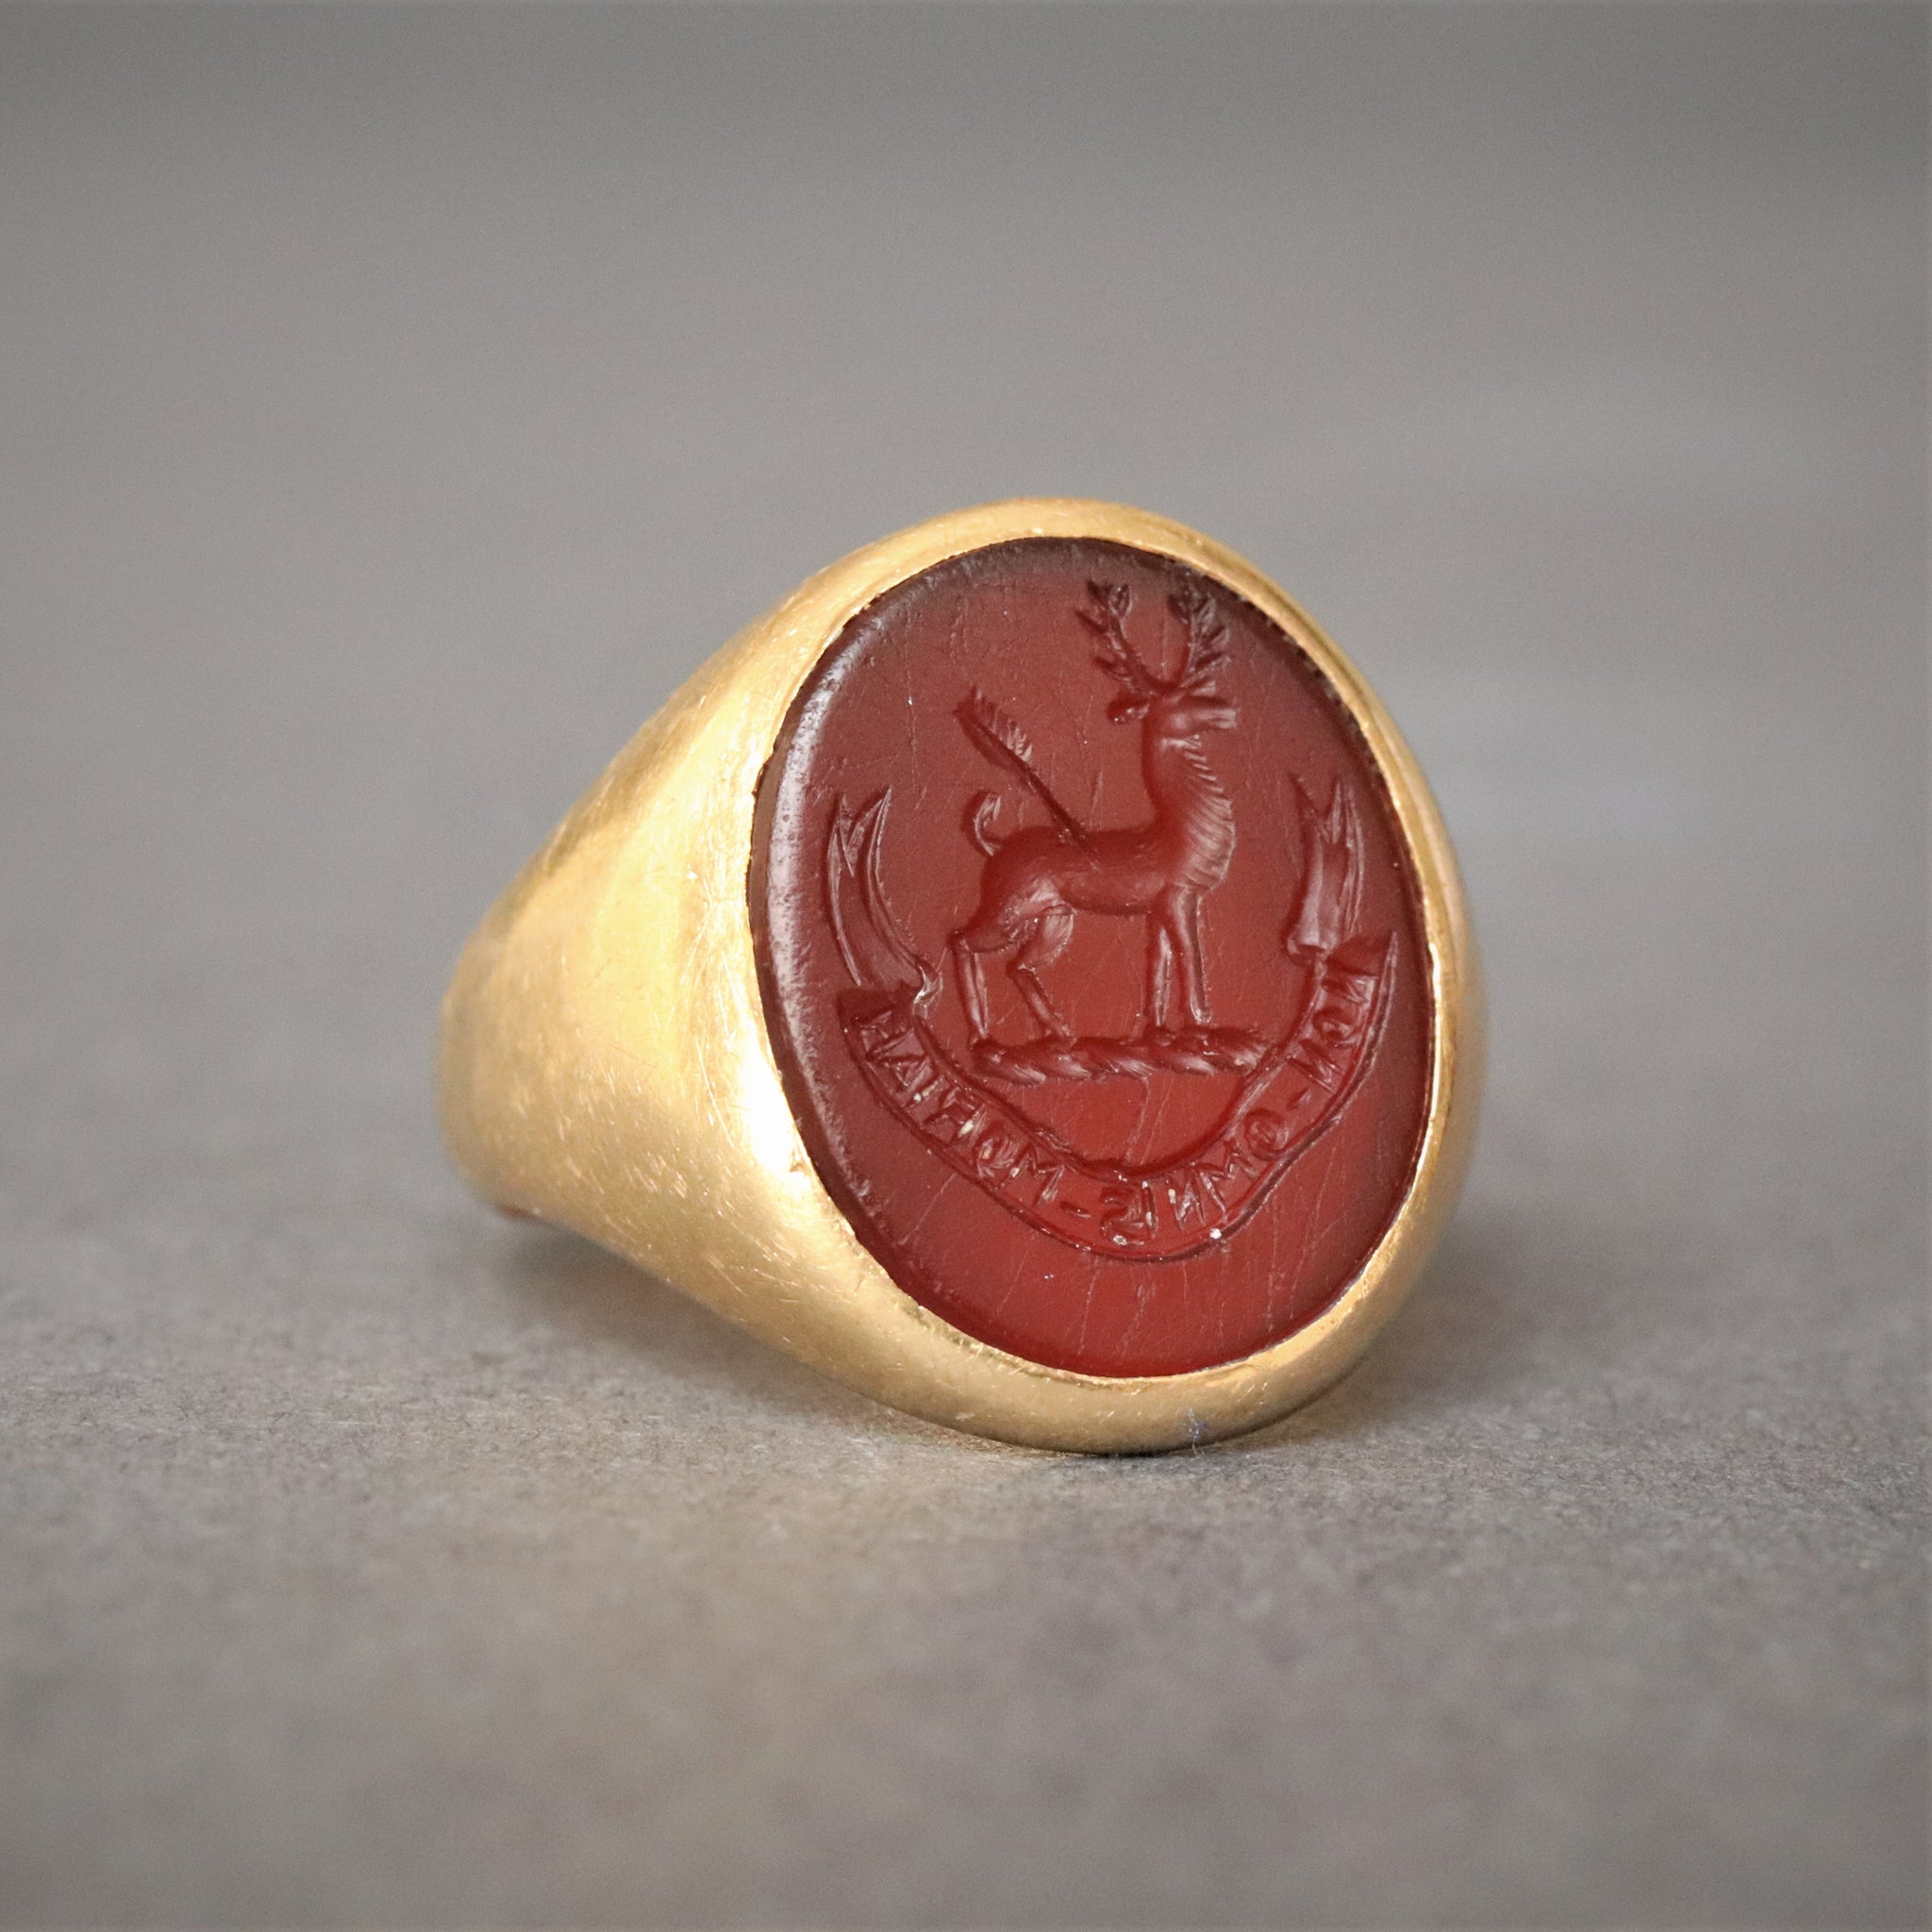 Estate Stambolian 18k Gold Aged Silver Carved Carnelian Floral Ring Size  6.5 / Gemstone Jewelry / Stambolian Jewelry / Carnelian Ring - Etsy